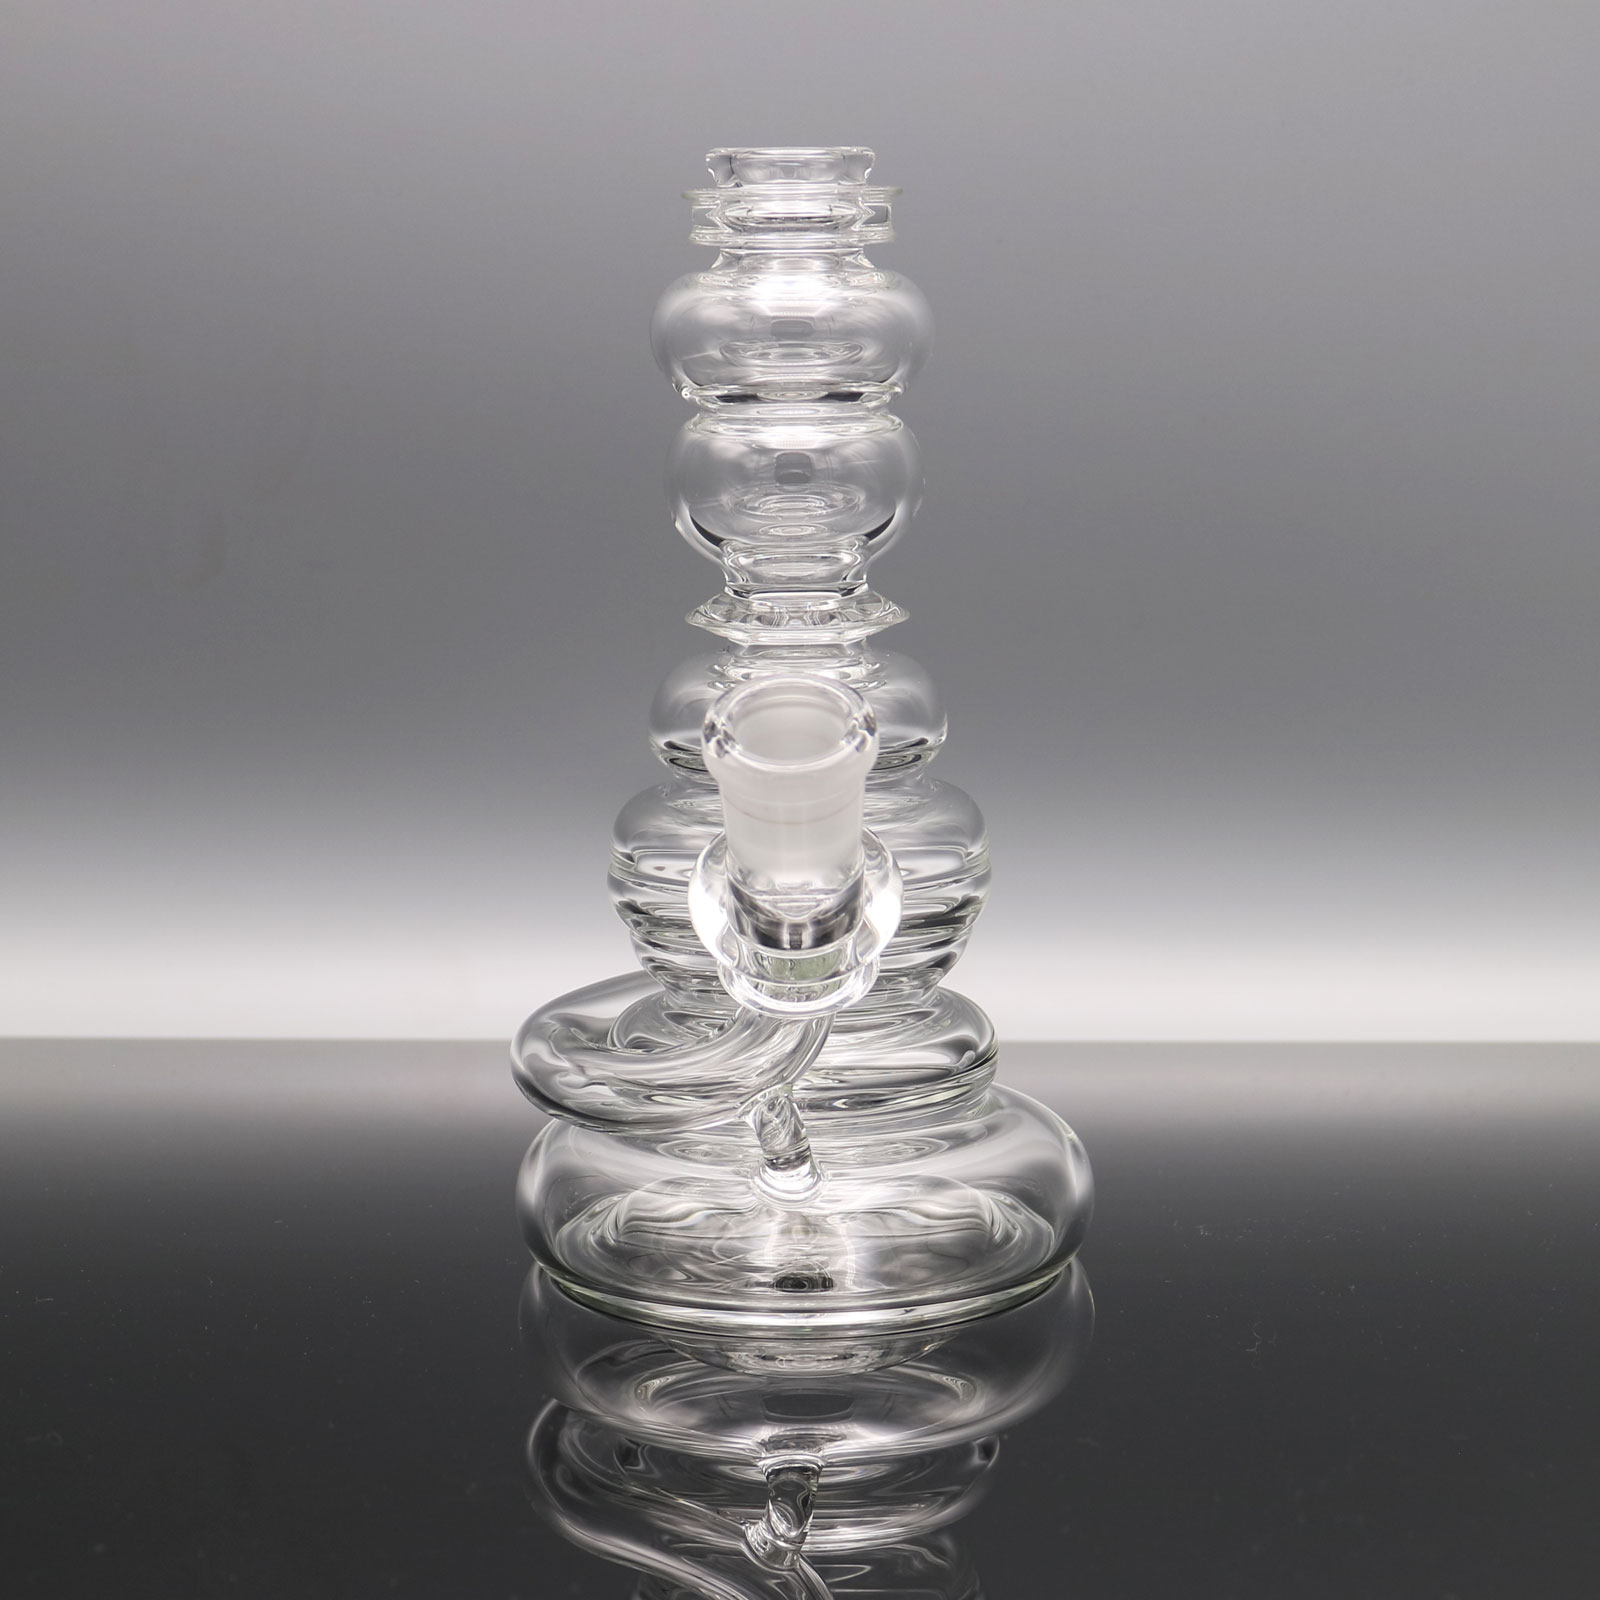 Mike Philpot – 2021 Clear 14mm Spinnerjet